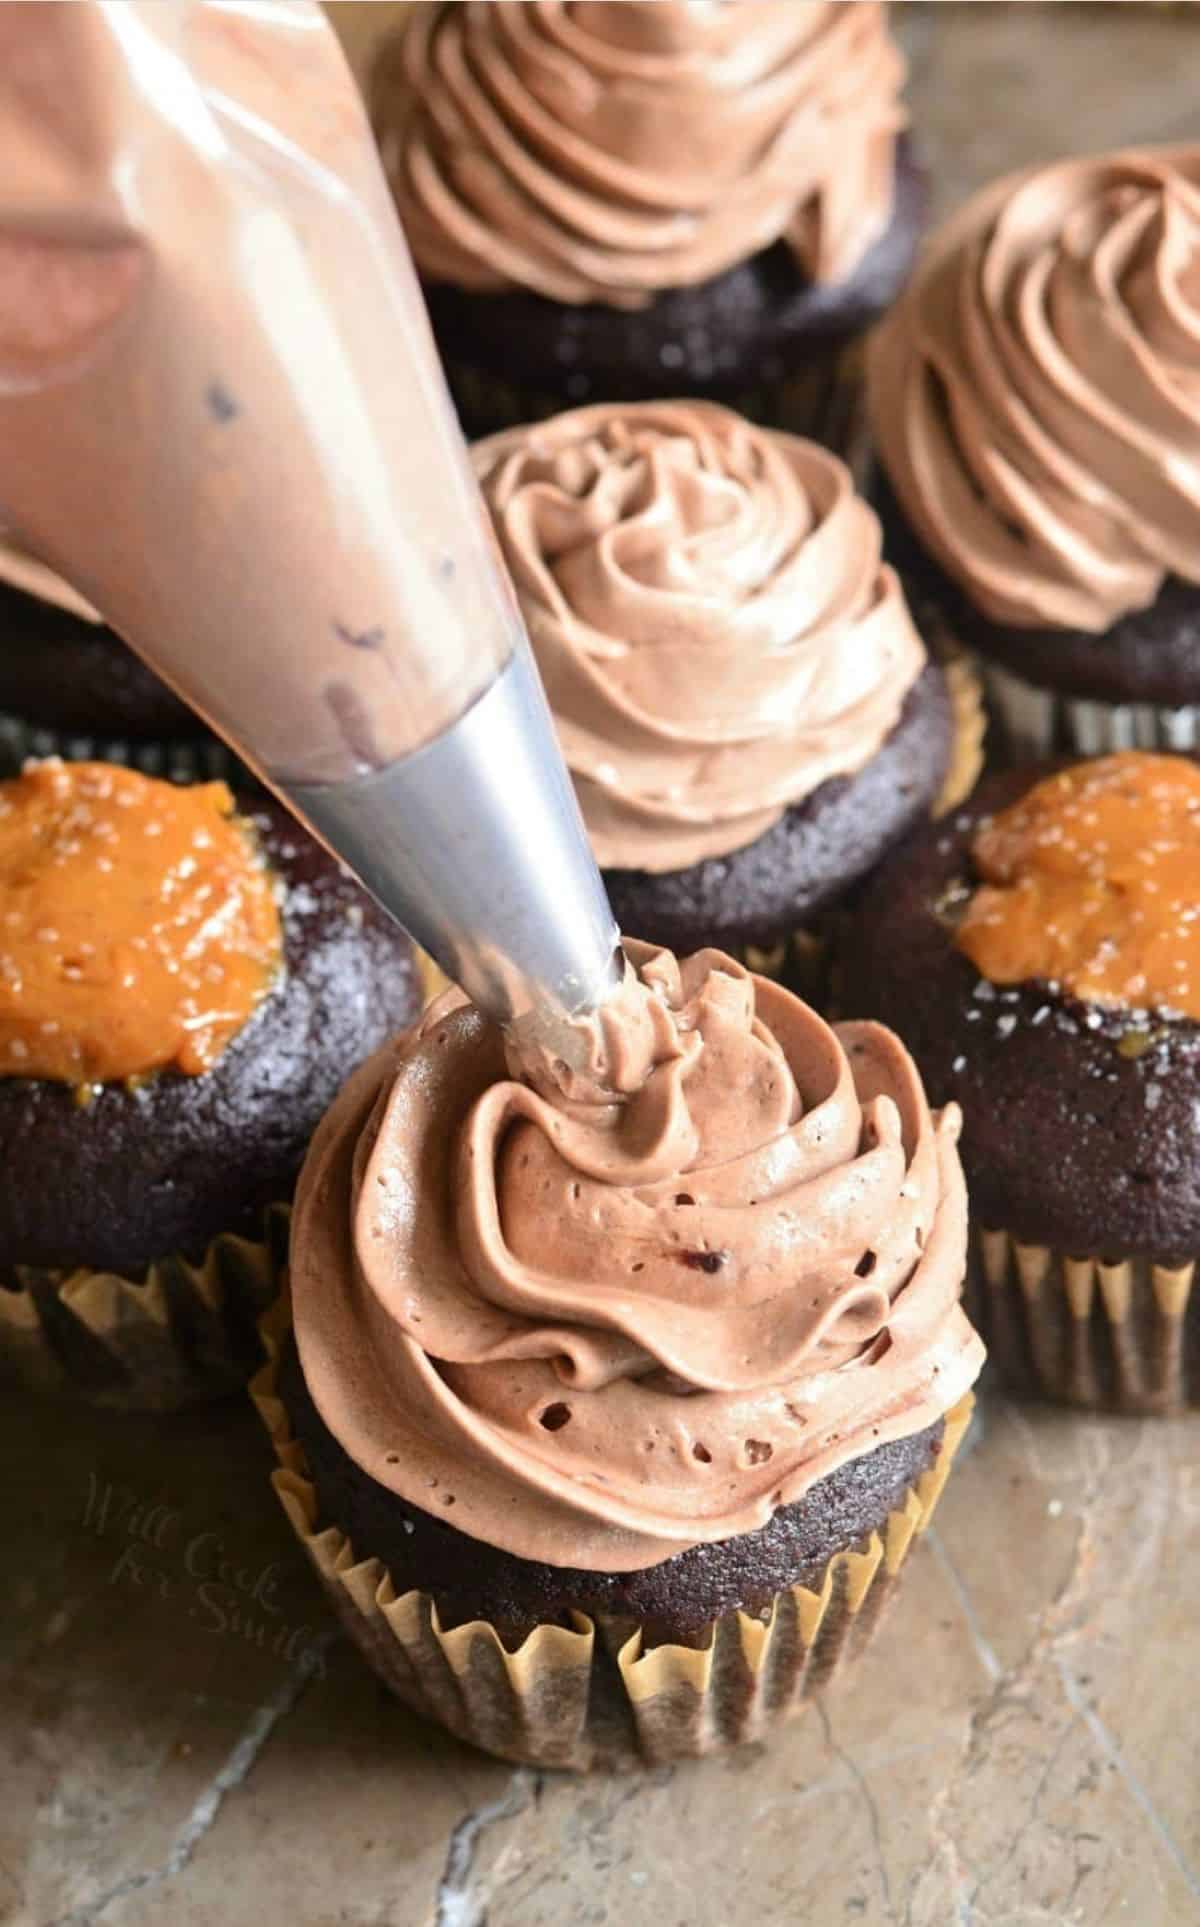 piping chocolate frosting onto a cupcake out of the piping bag and metal tip.